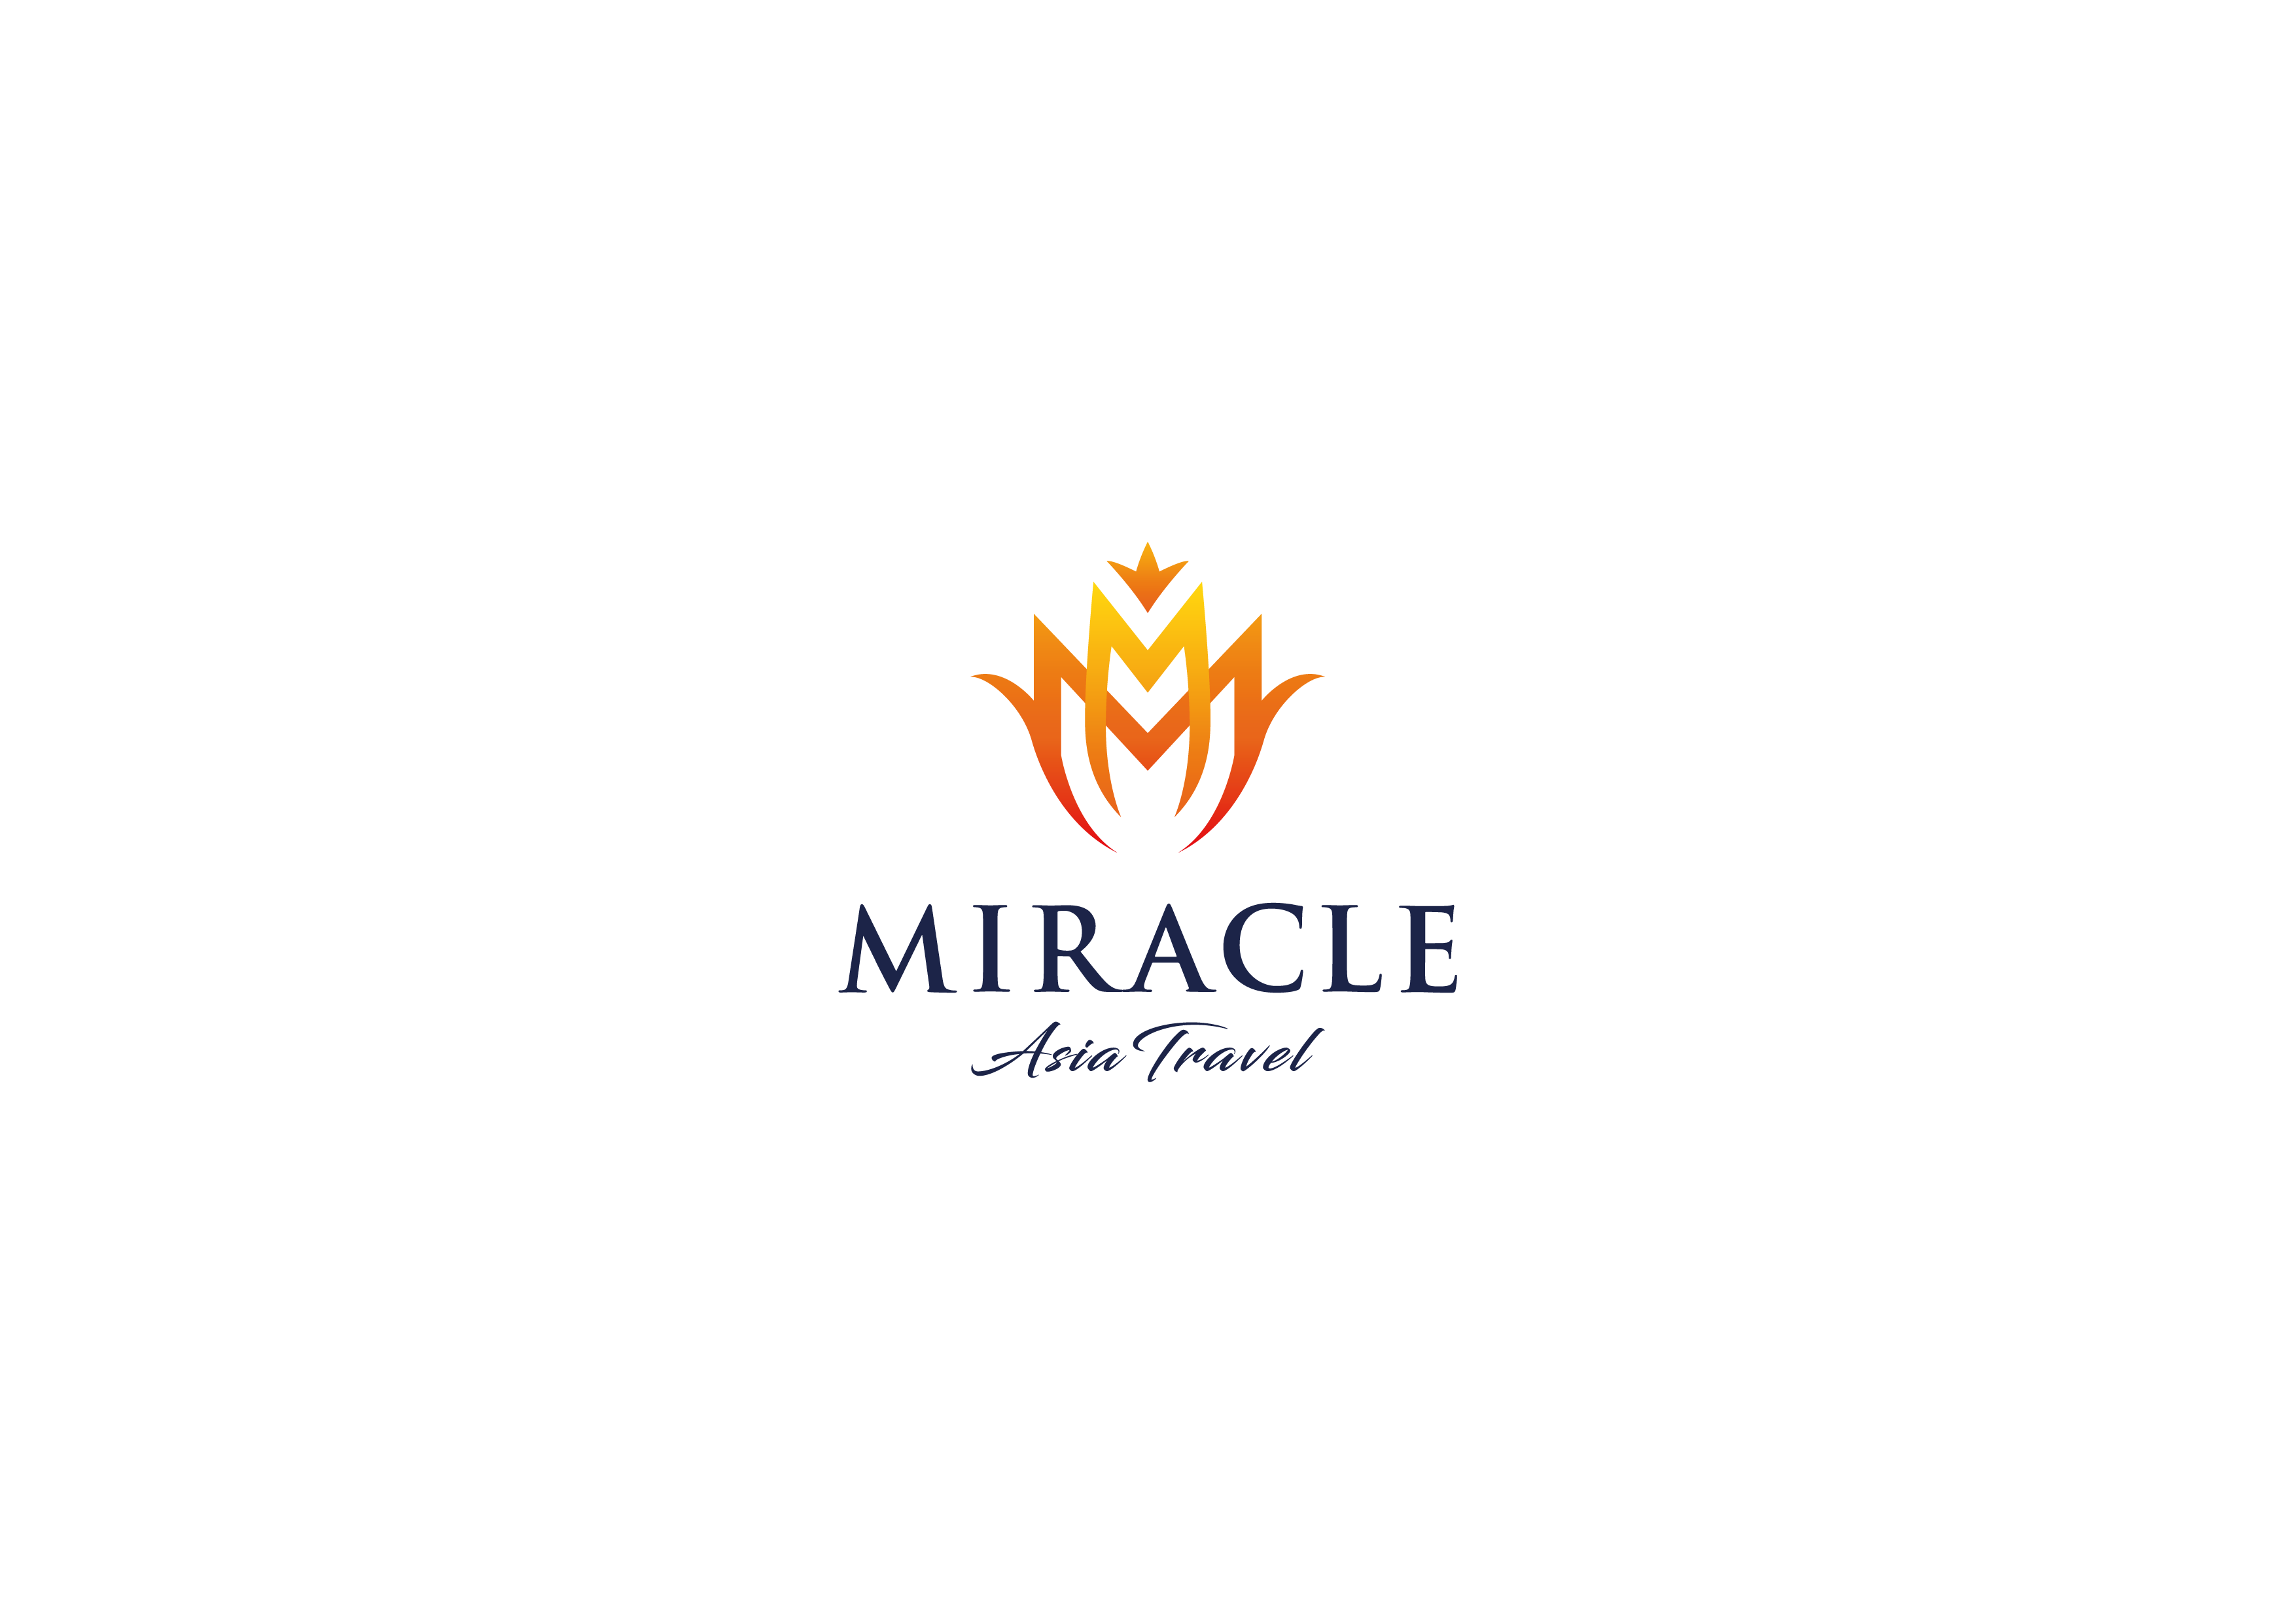 Miracle Asia Travel